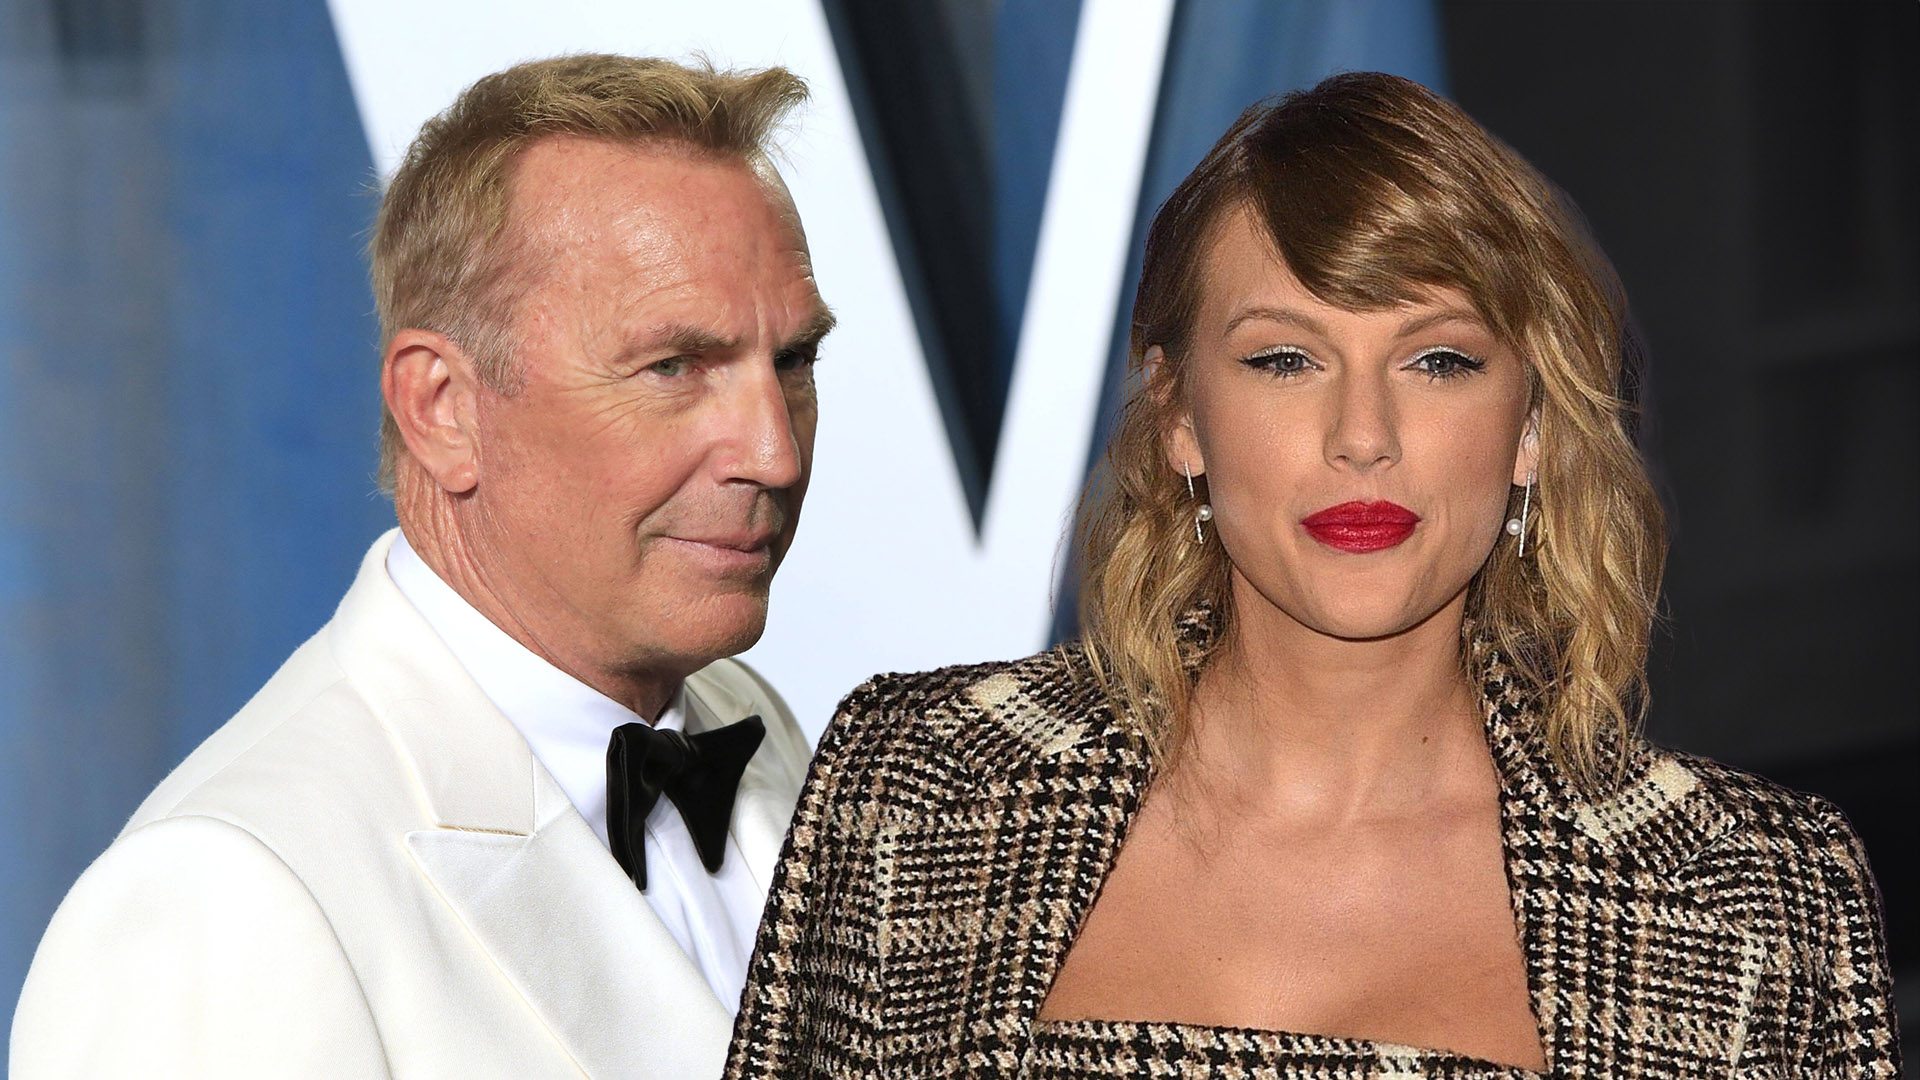 Amid Messy Divorce Drama, Kevin Costner is Now 'Officially a Swiftie'